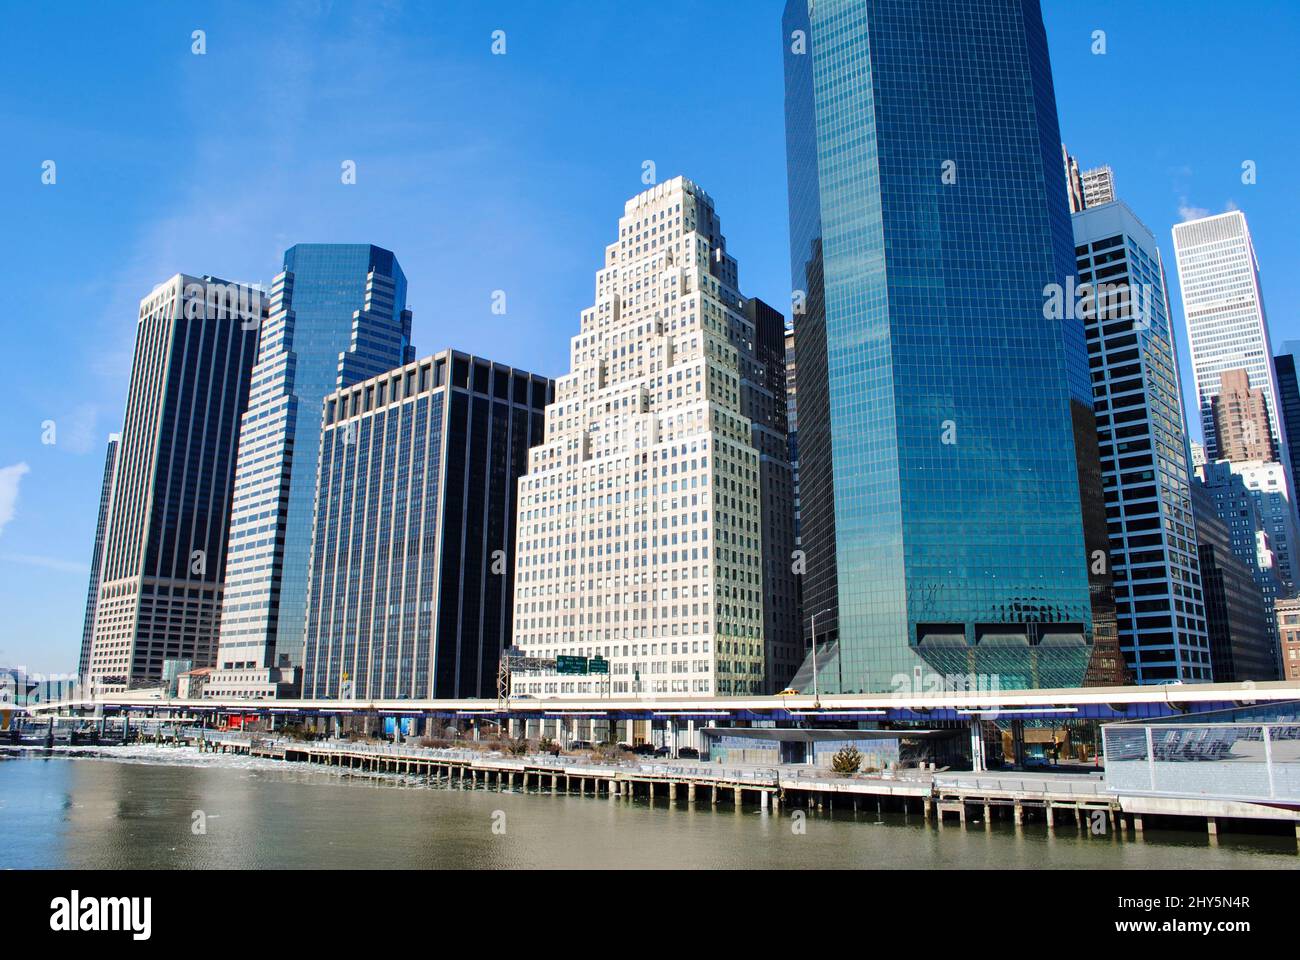 The Wall Street area in downtown Manhattan with elevated FDR-drive seen from Pier 17, New York City Stock Photo